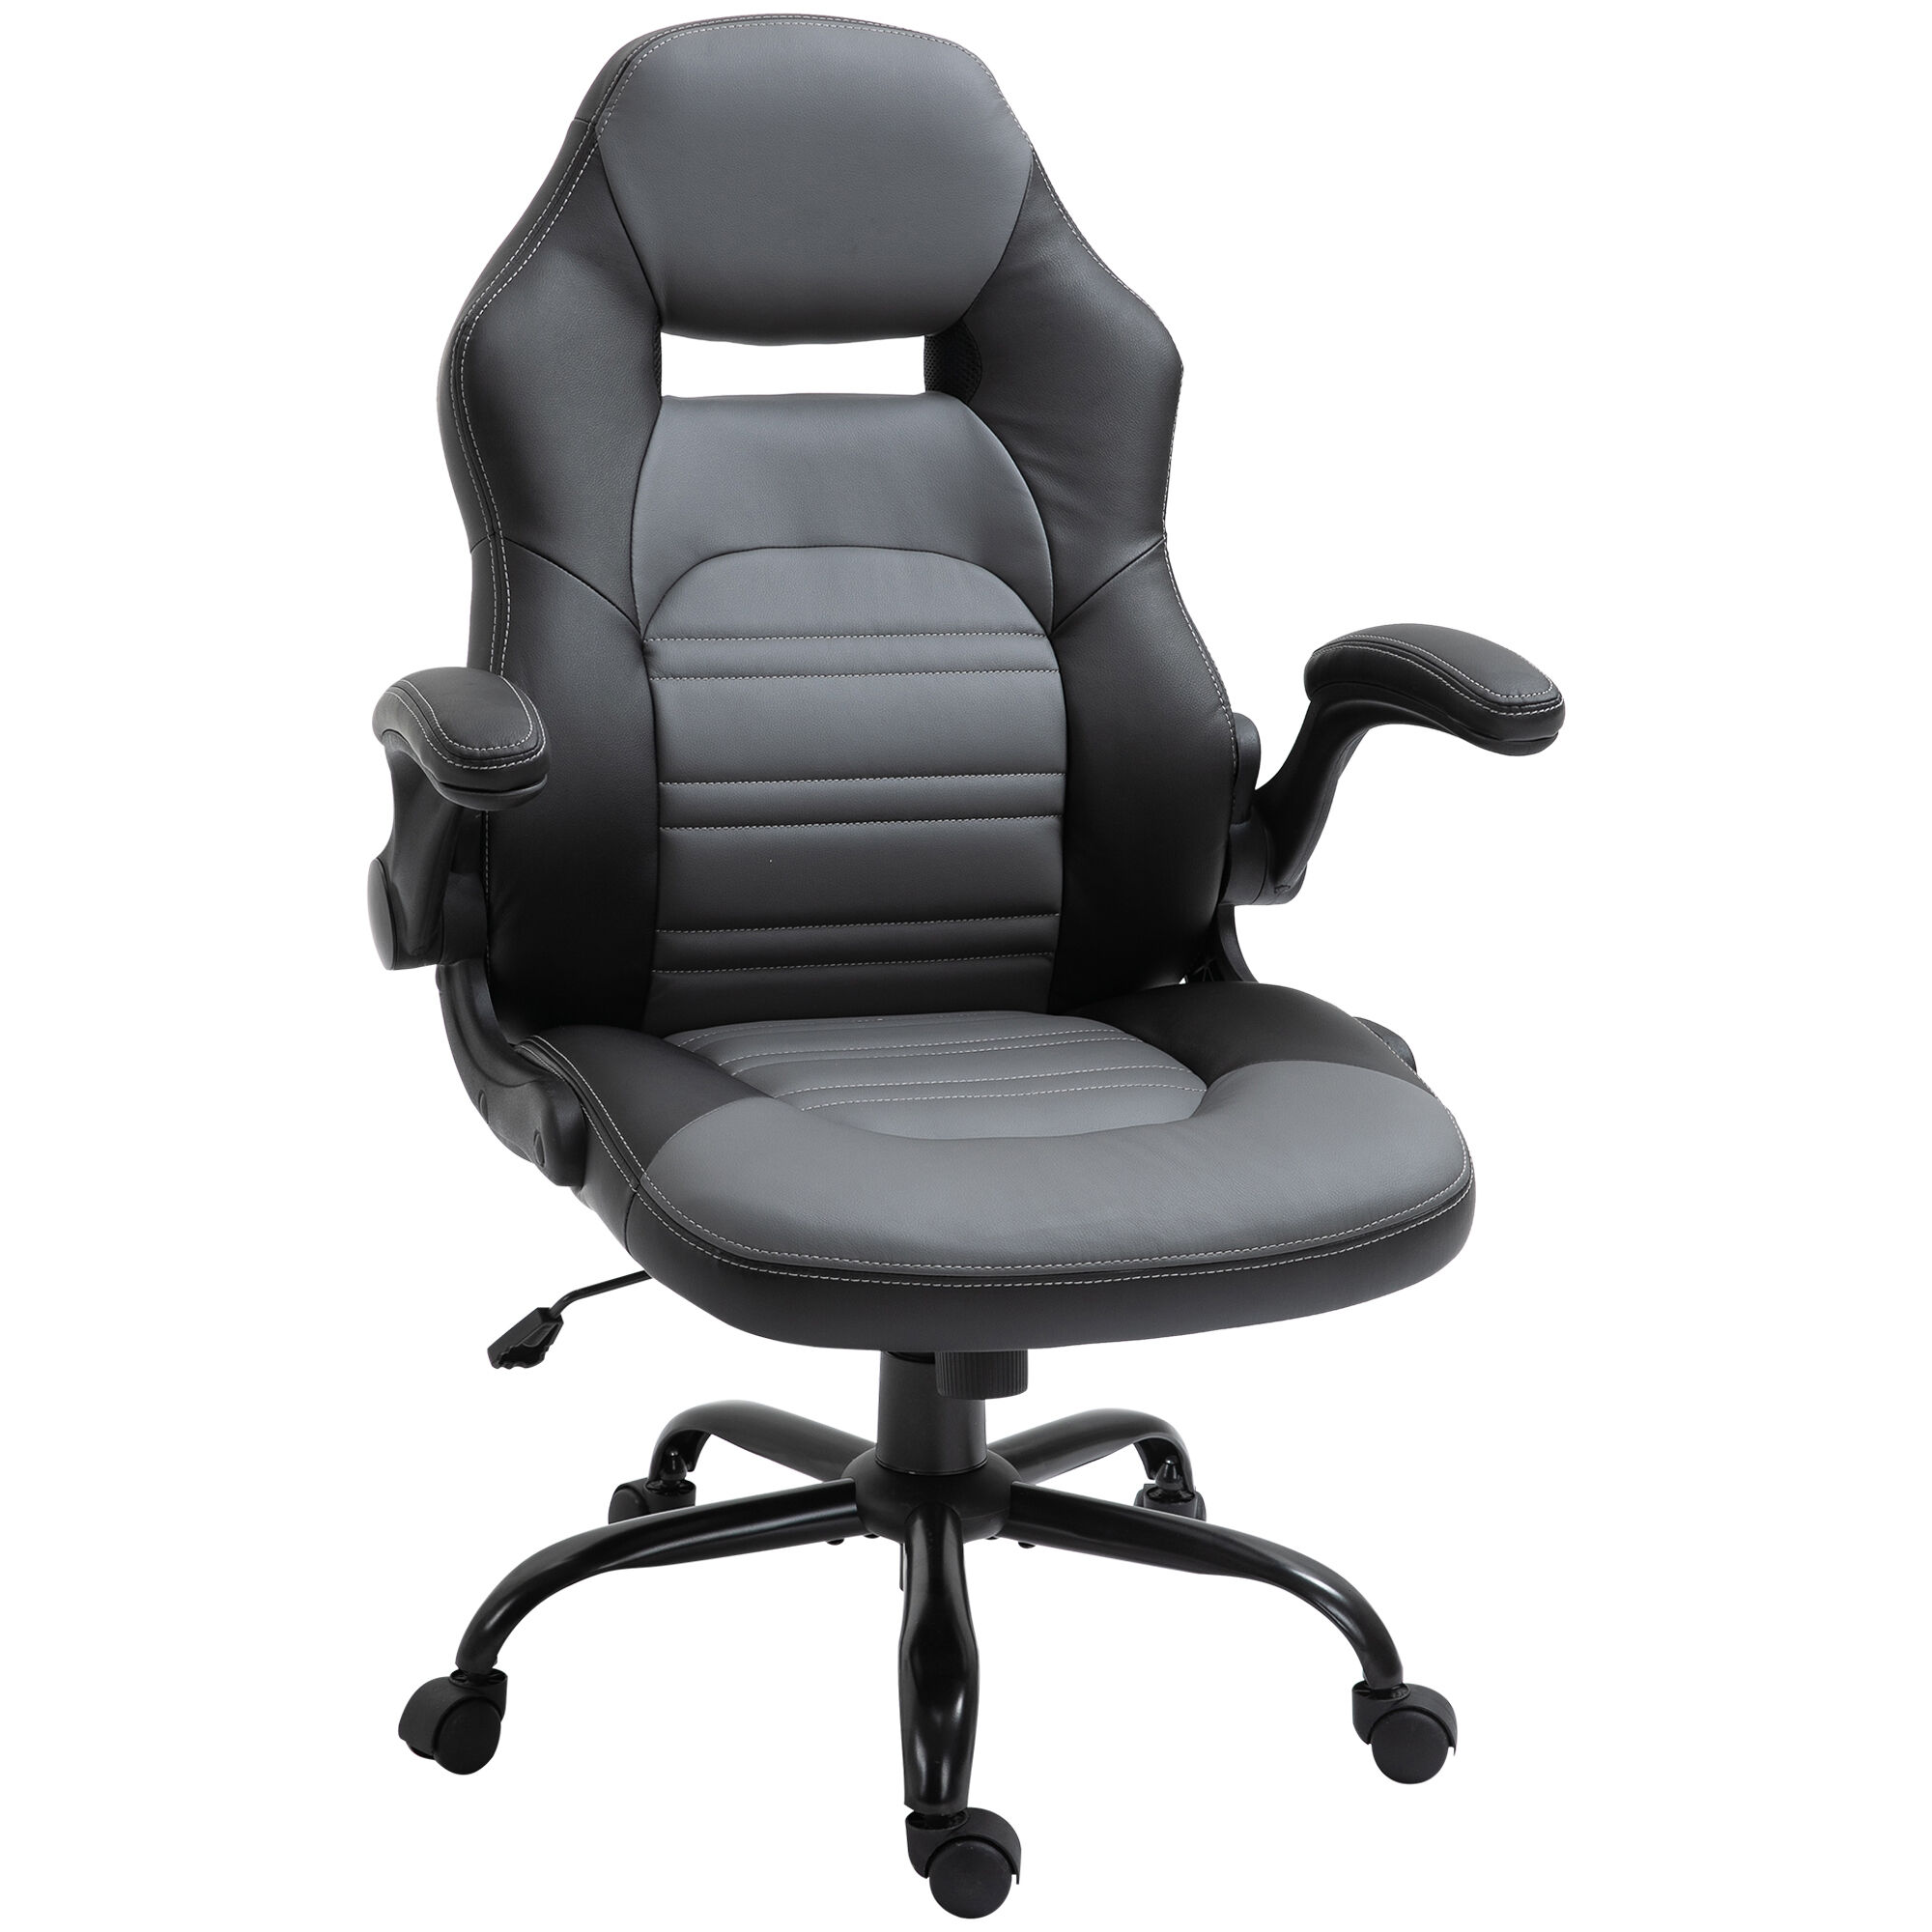 Vinsetto Gaming Chair Swivel Home Office Computer Racing Gamer Desk Chair with Flip-Up Armrest with Wheels